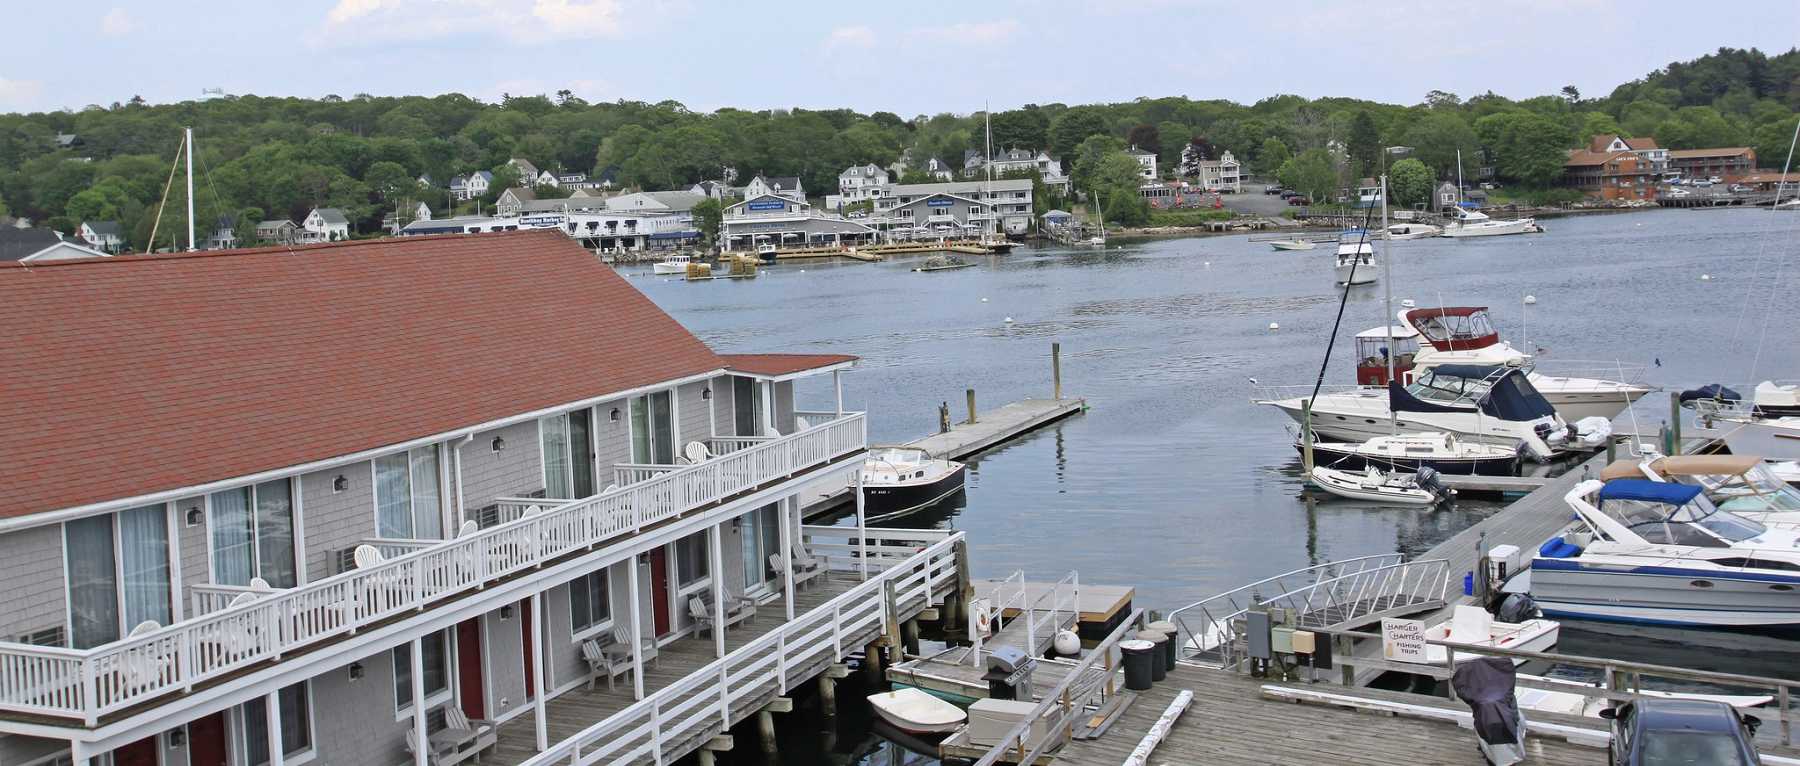 Tugboat Inn at Boothbay Harbor, ME - Lafayette Hotels